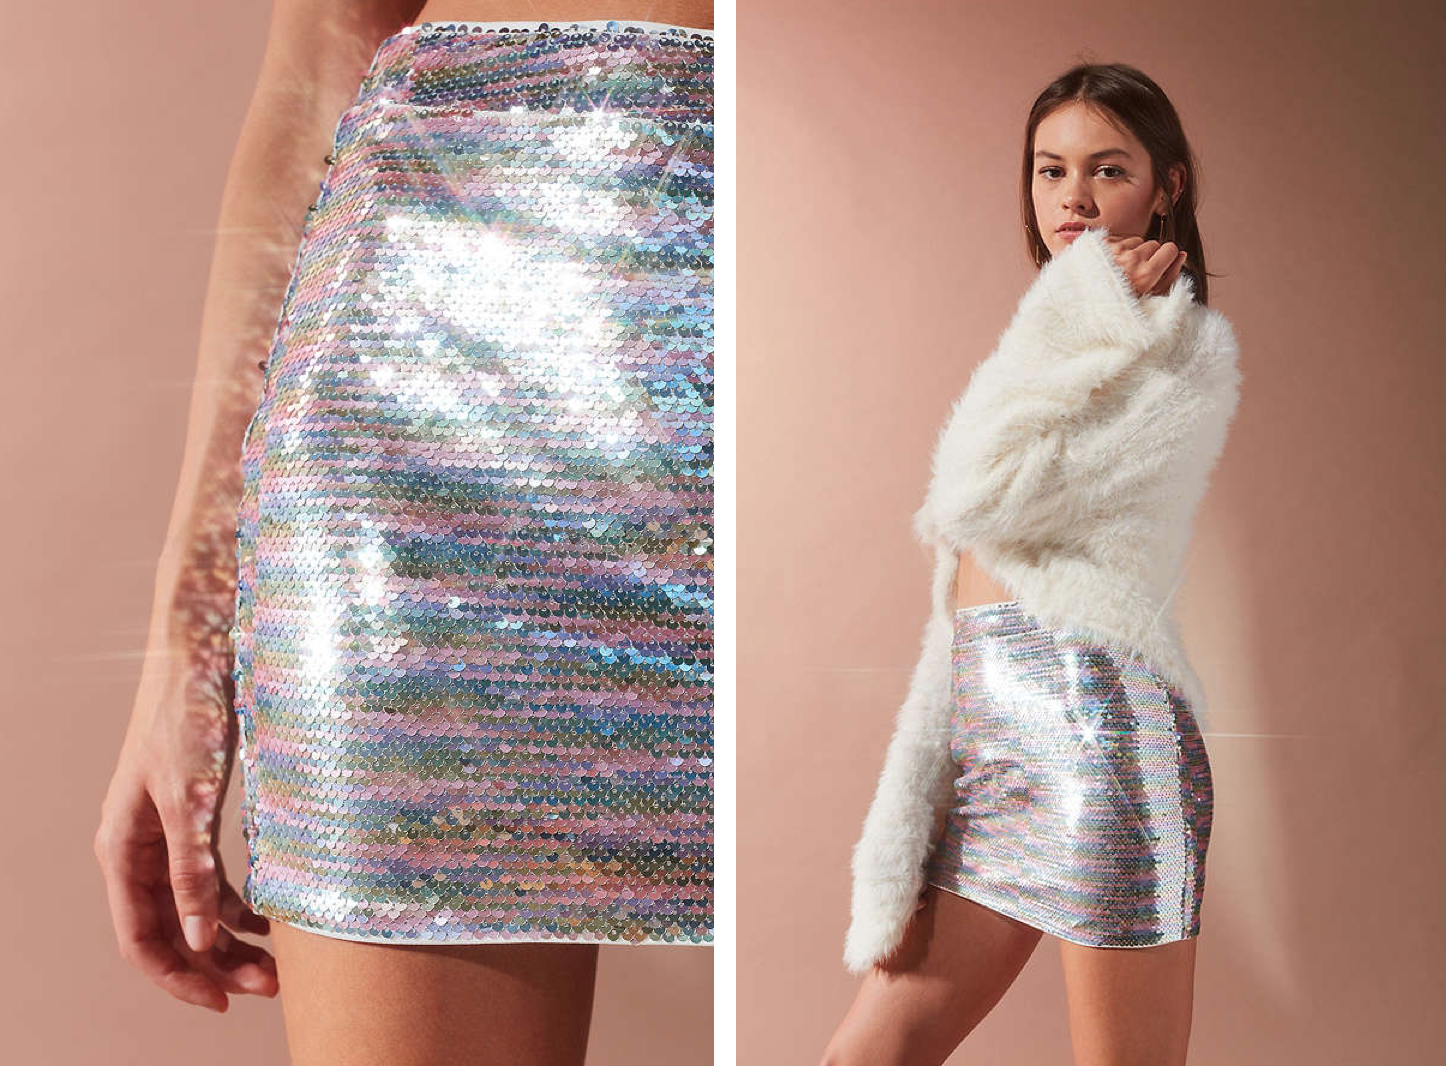 Sequin skirt from Urban Outfitters